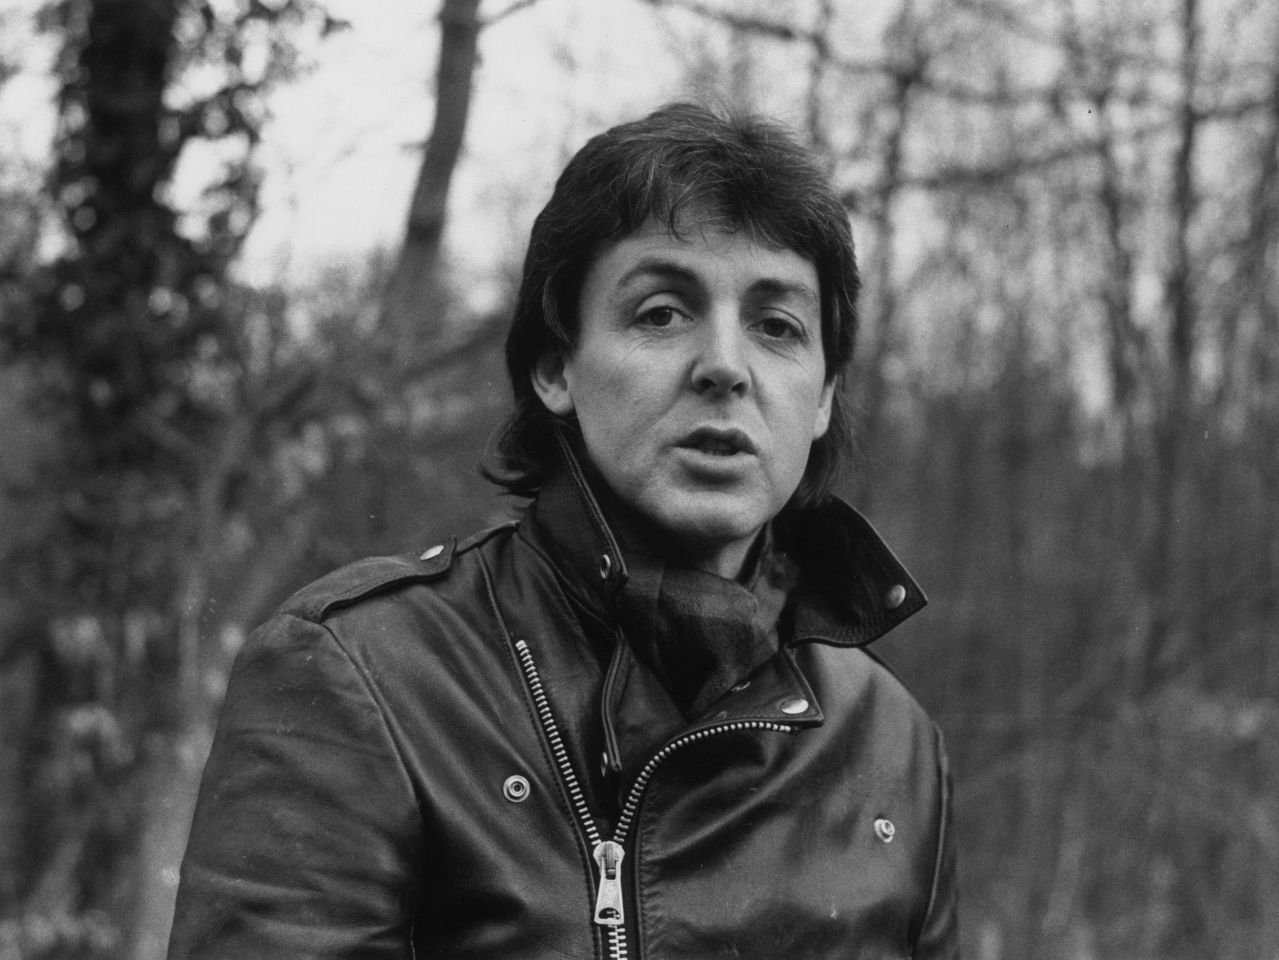 Paul McCartney on his farm near Rye, Sussex, January 28, 1980. | Source: Getty Images